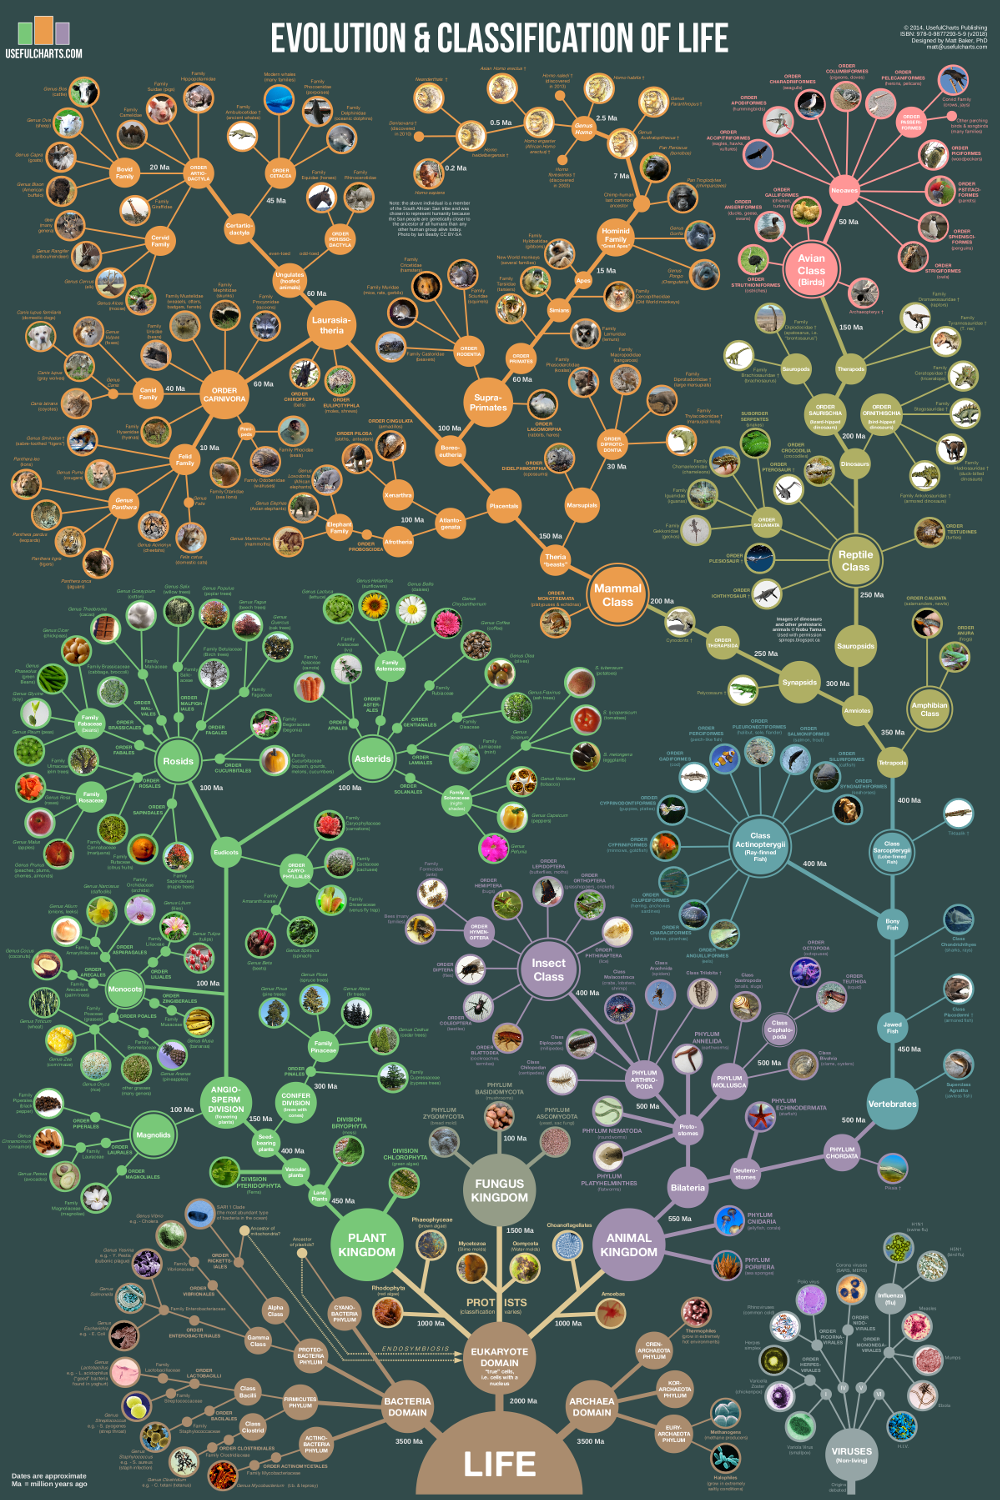 evolution-tree-of-life-poster_1024x1024@2x.png